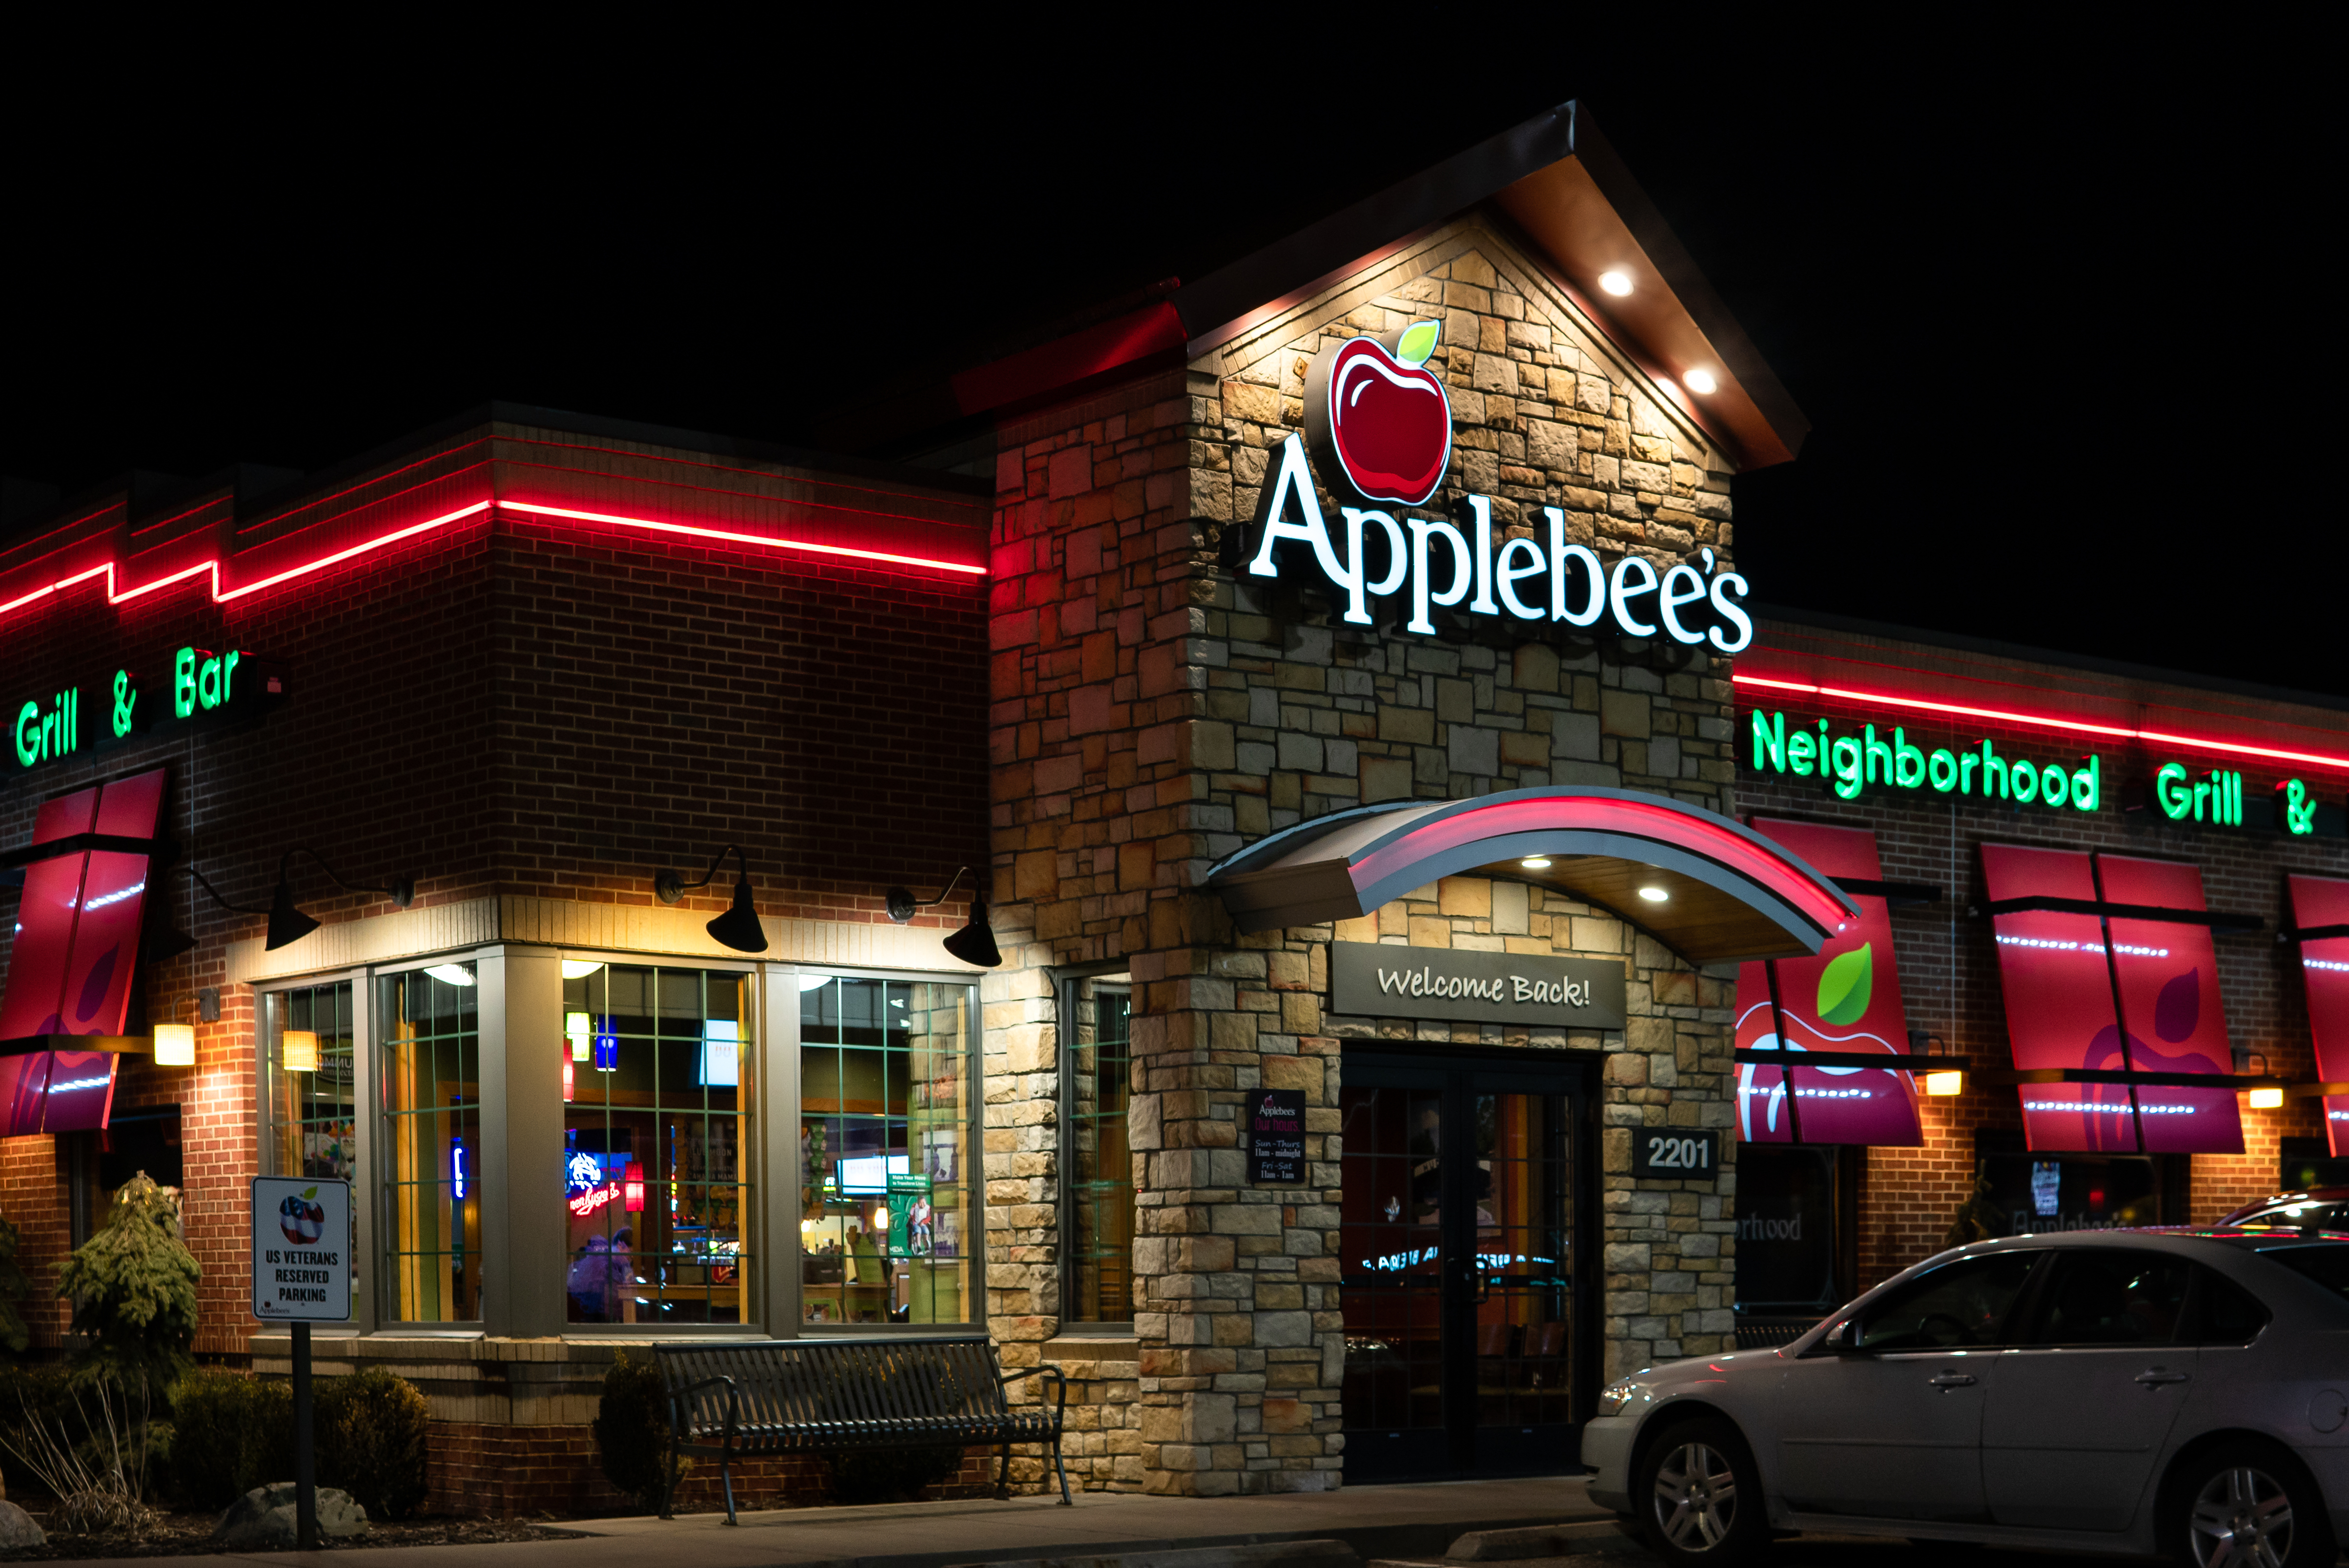 At night, the beige brick exterior of an Applebee’s restaurant is illuminated by red and green neon lights